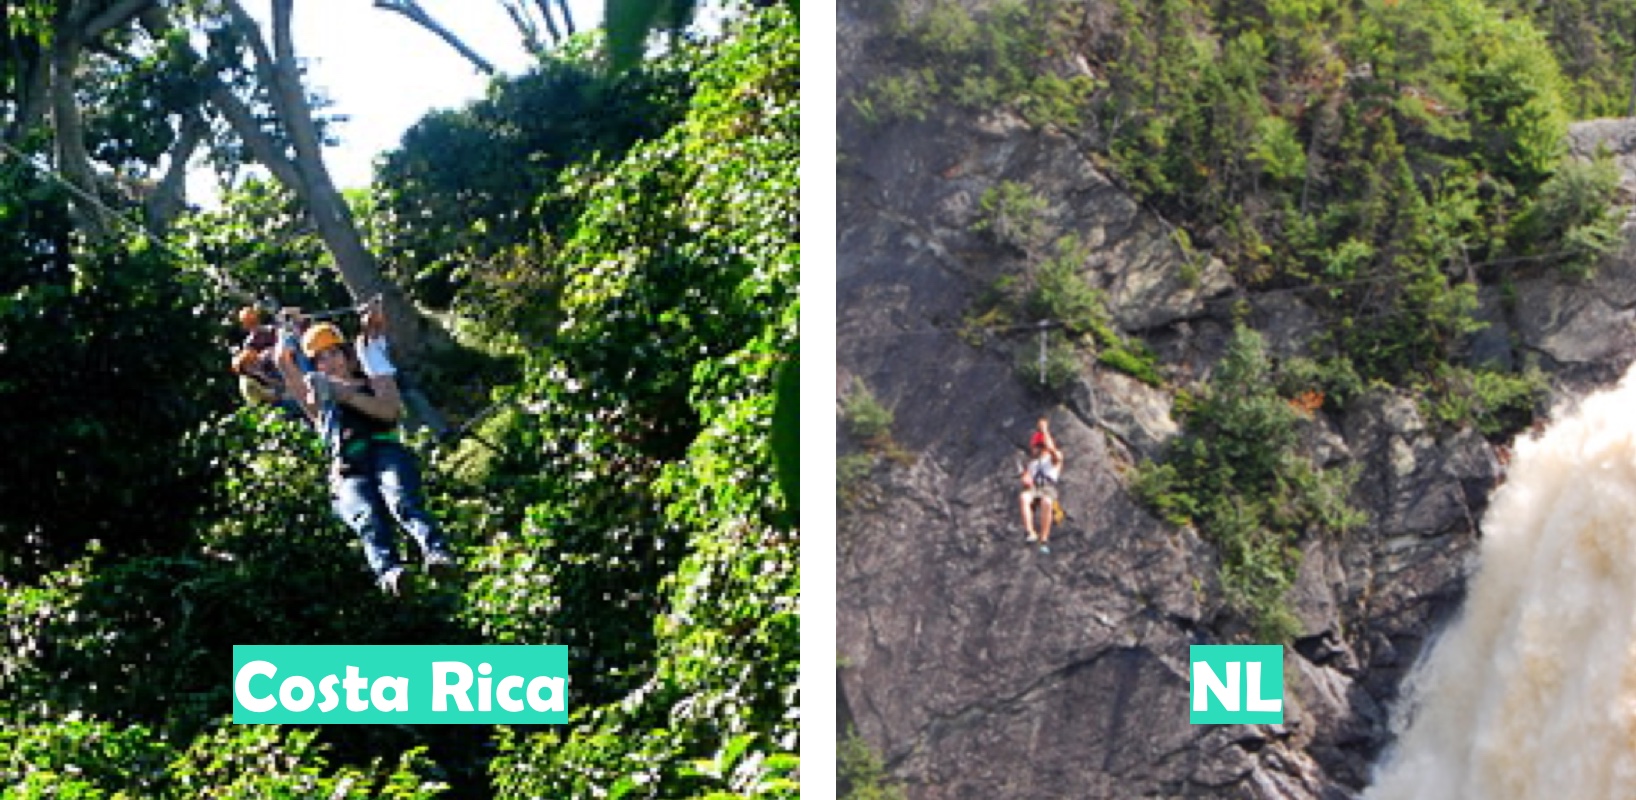 Costa Rica (Aventura Canopy Tours pictured) vs Newfoundland & Labrador (Marble Zipline Tours pictured)